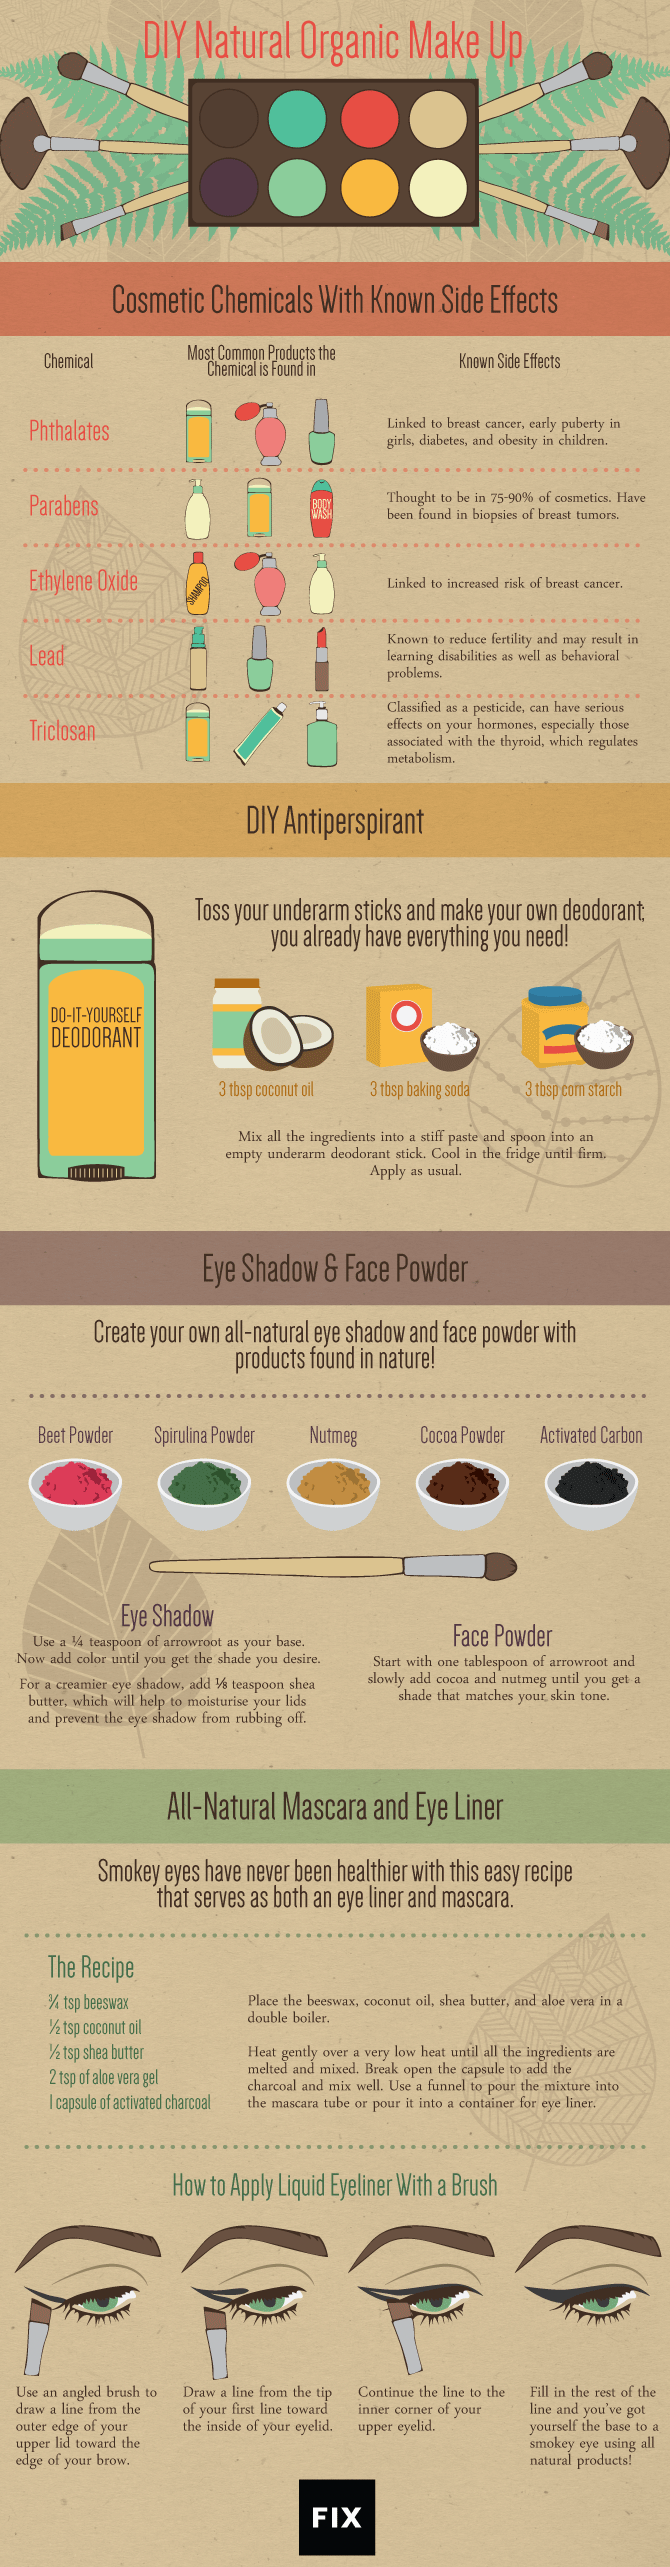 Whos up for making your own cosmetics? Here are a few ideas.